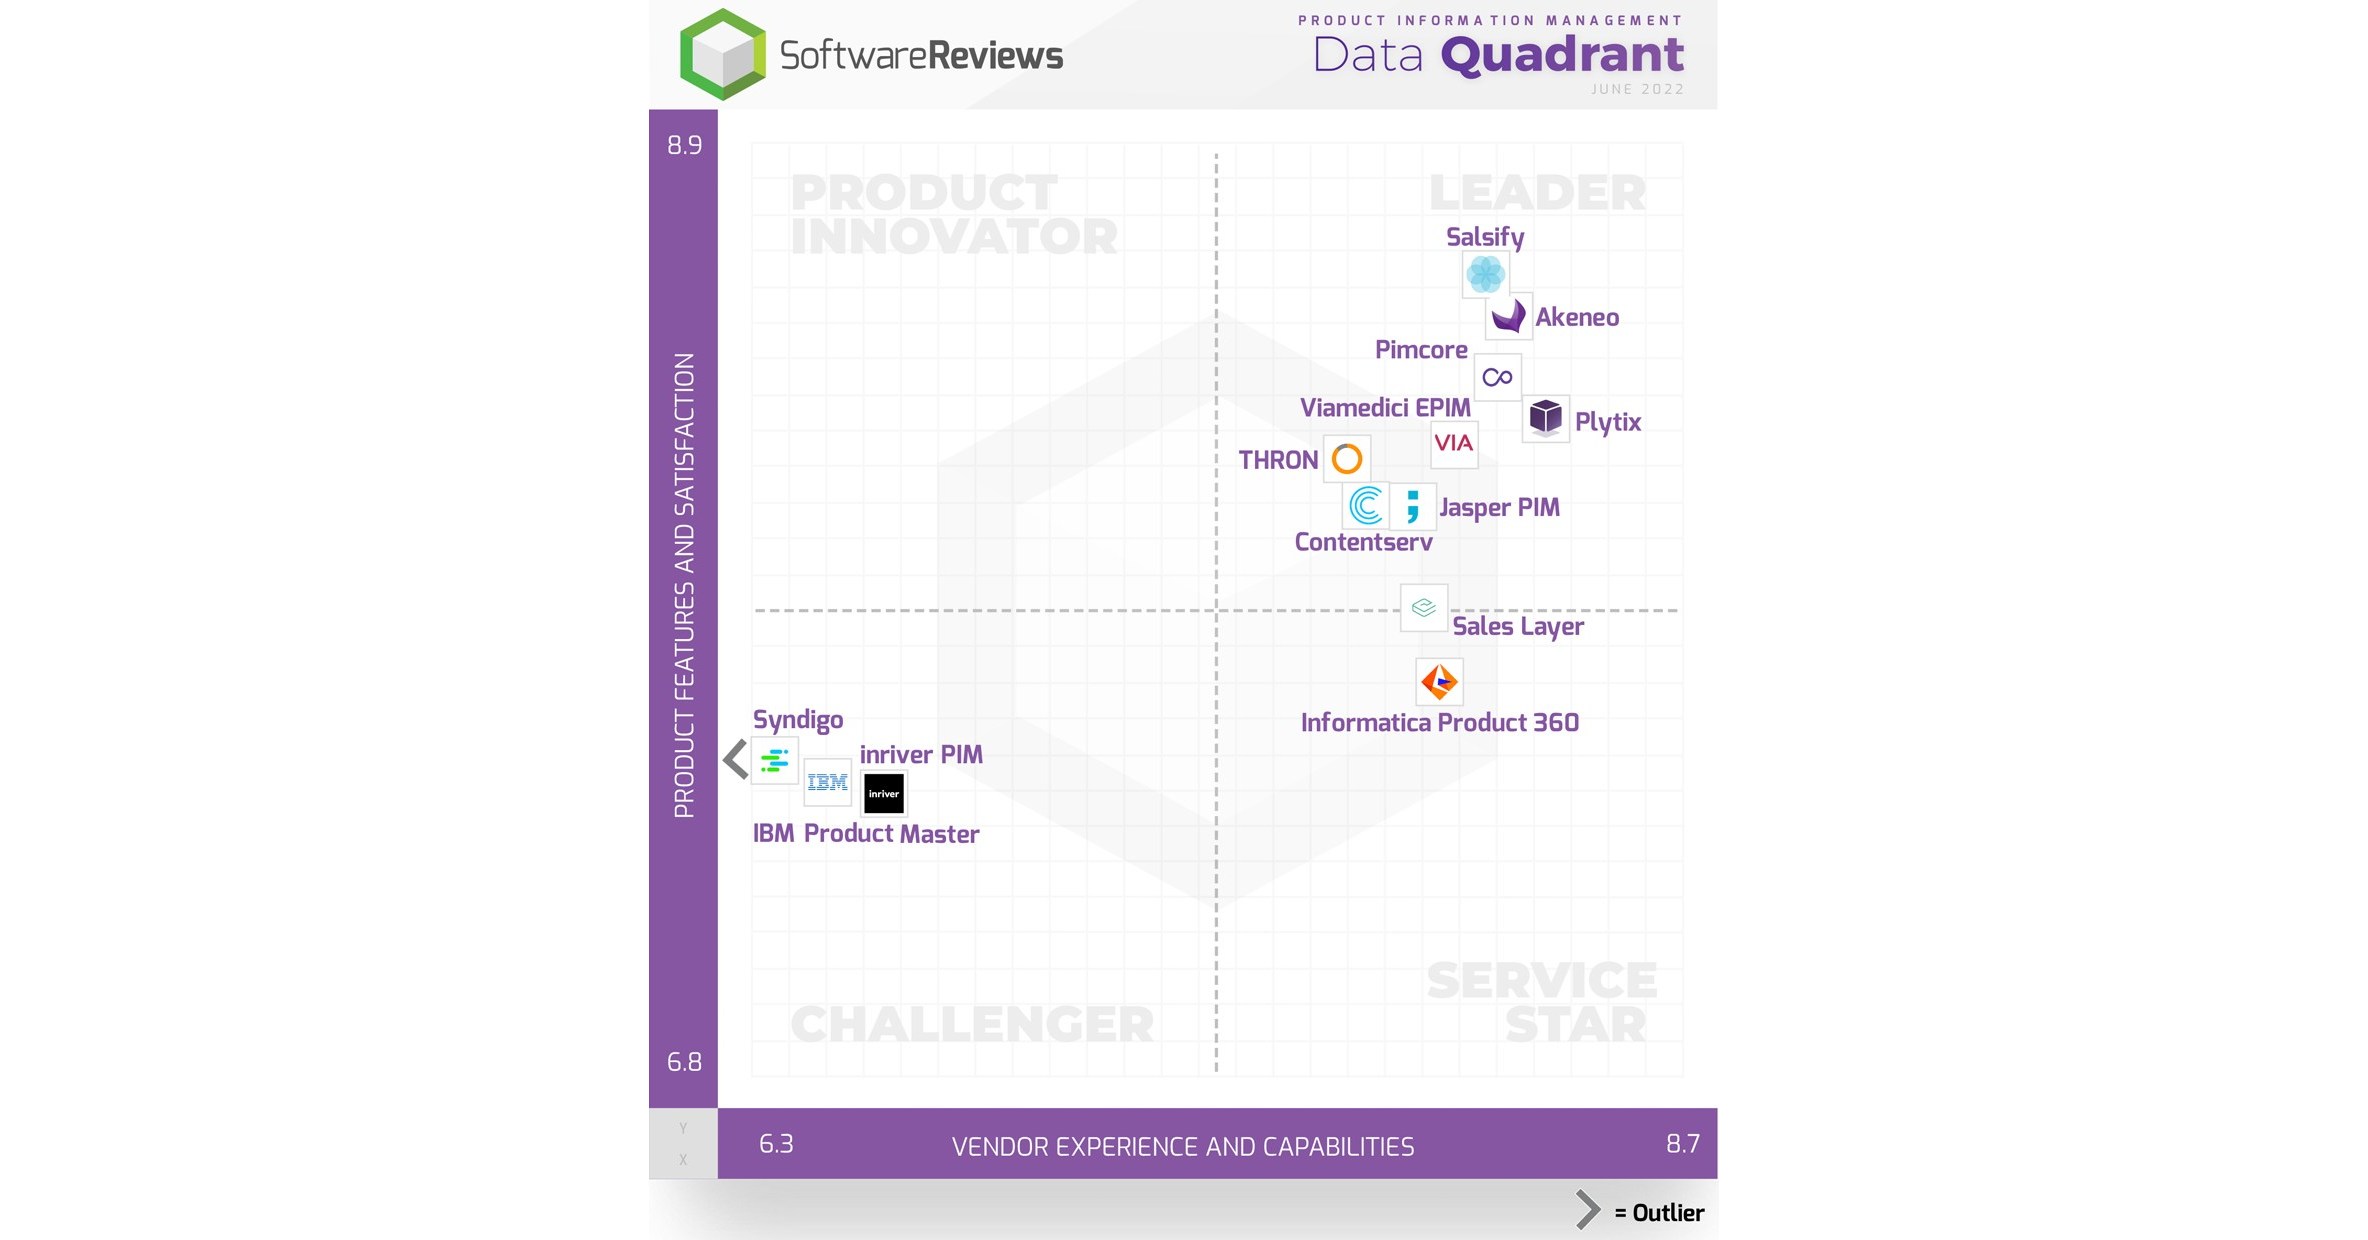 The Top Ranked Product Information Management Providers to Boost Product Management and Delivery, According to SoftwareReviews Data